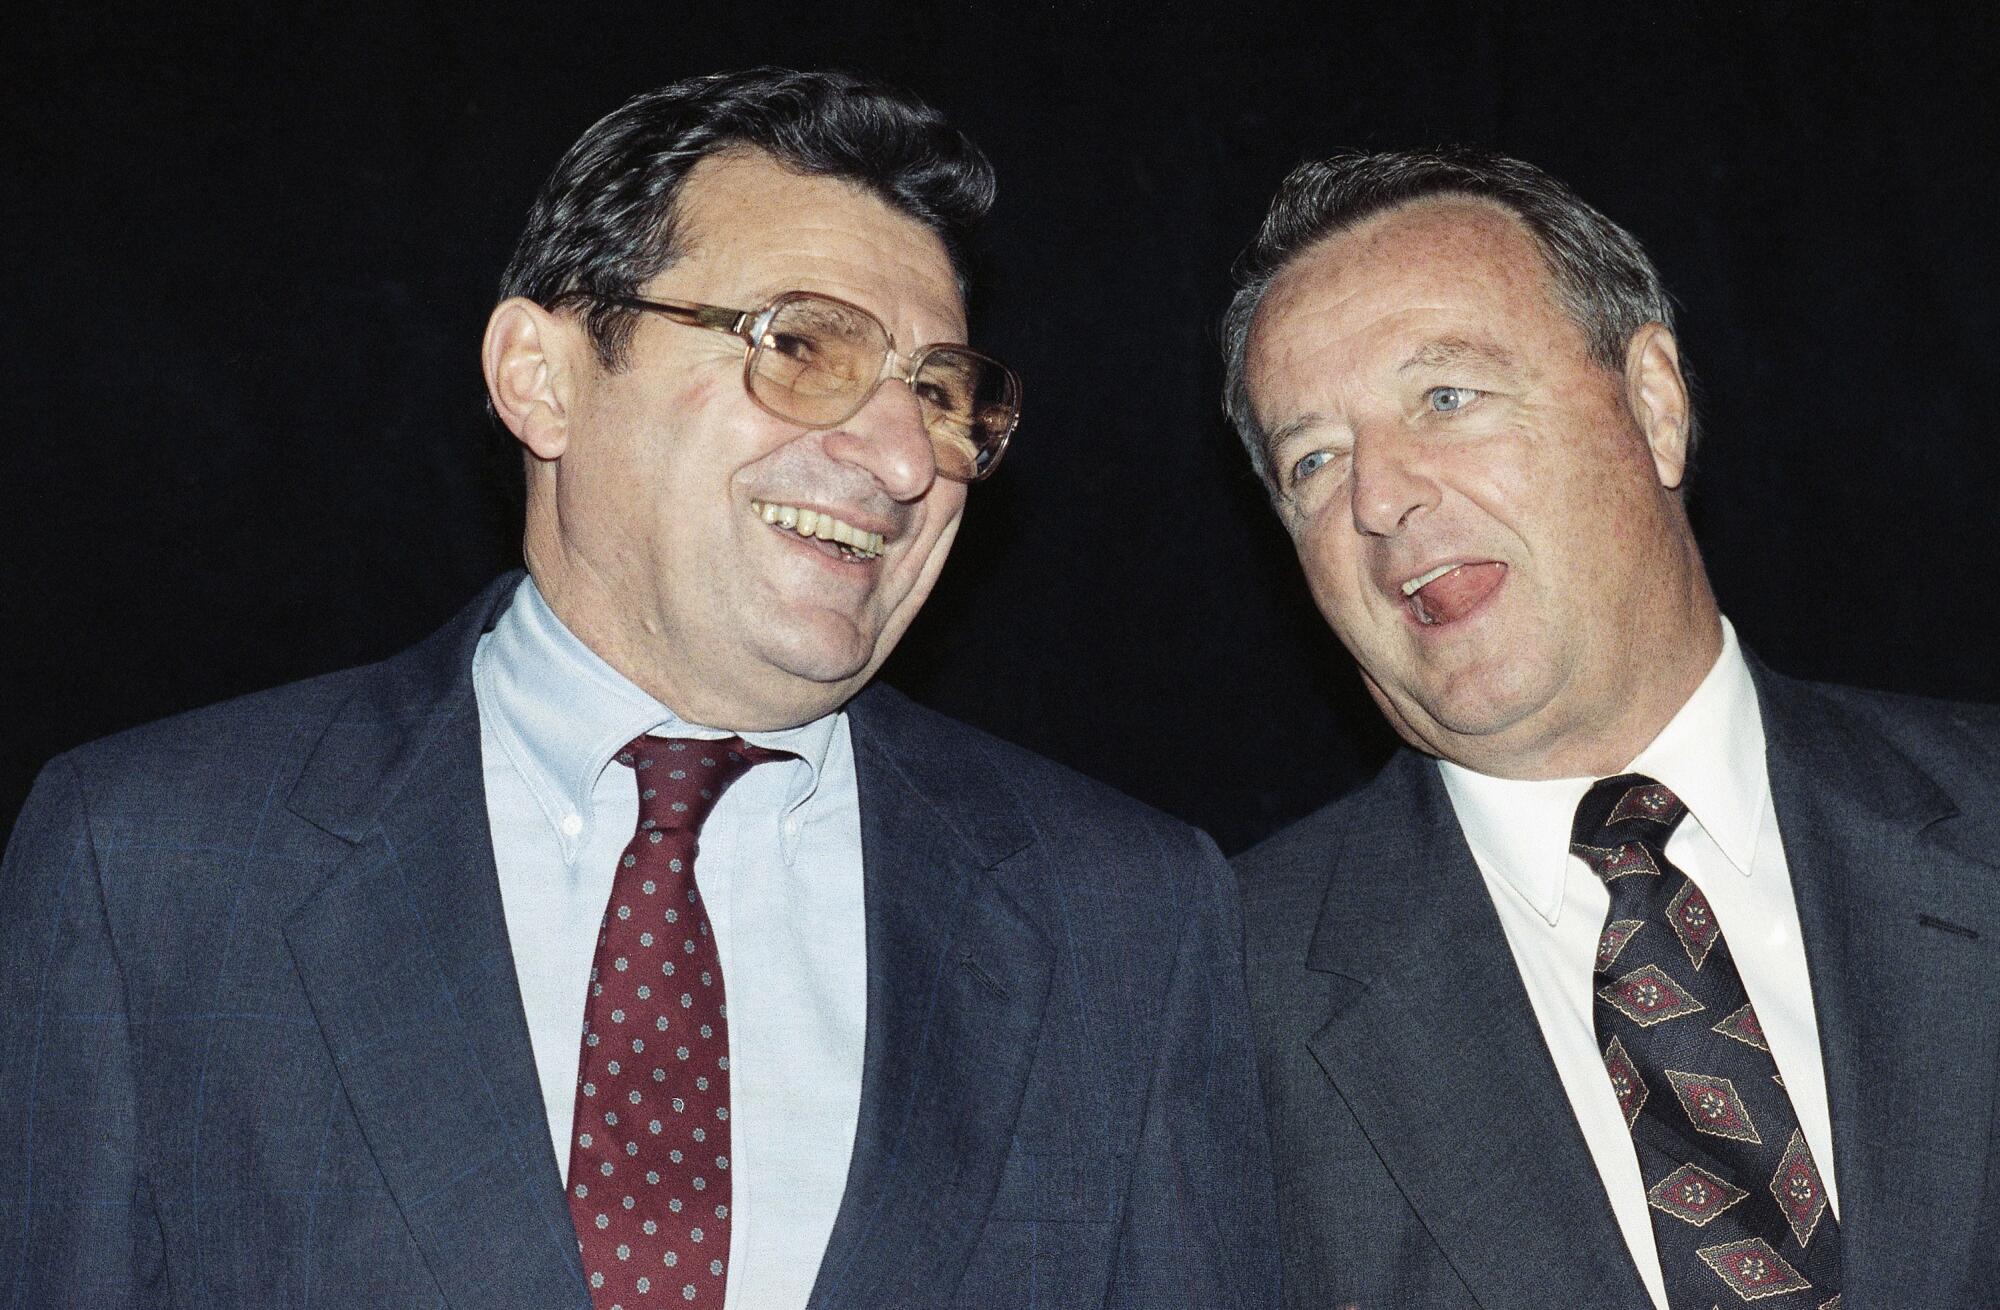 A closeup of Joe Paterno and Bobby Bowden standing together.